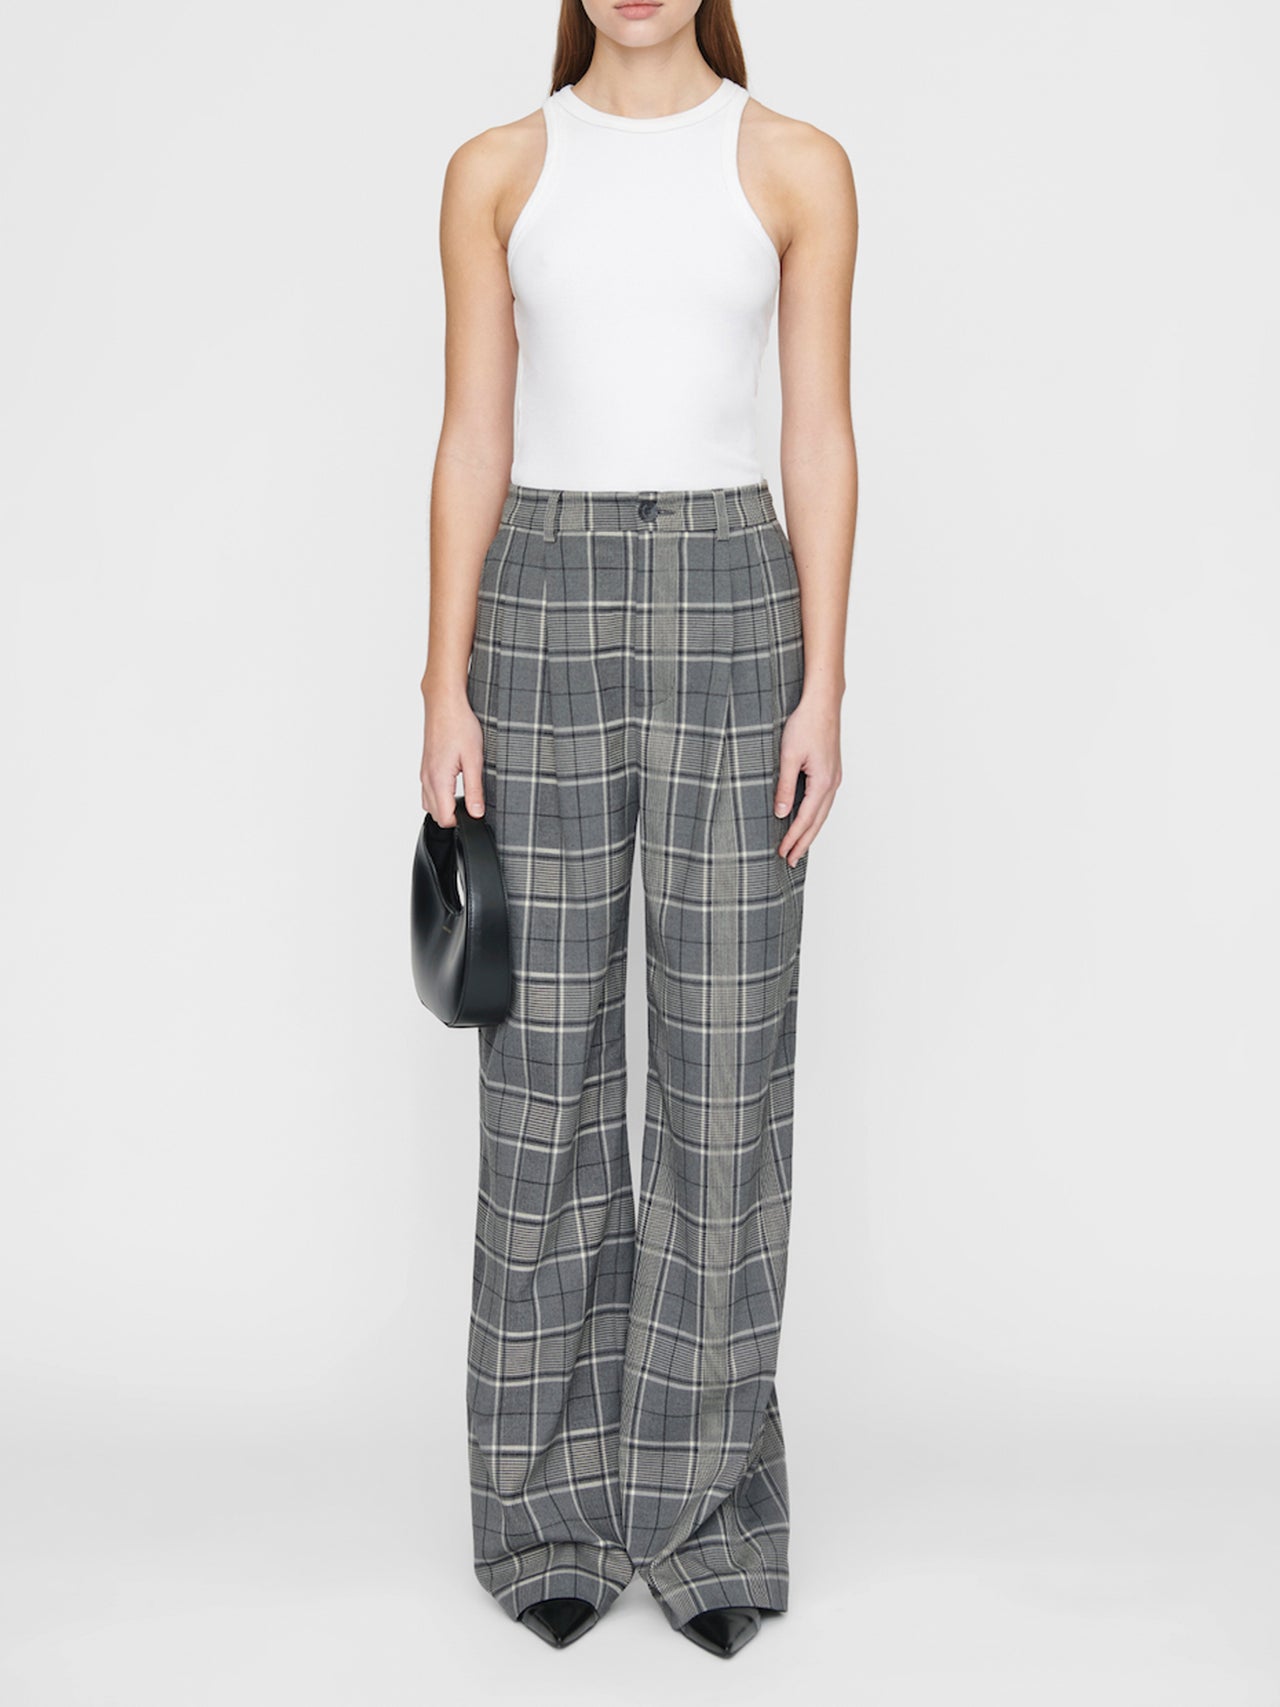 the-lair-anine-bing-carrie-pant-grey-plaid